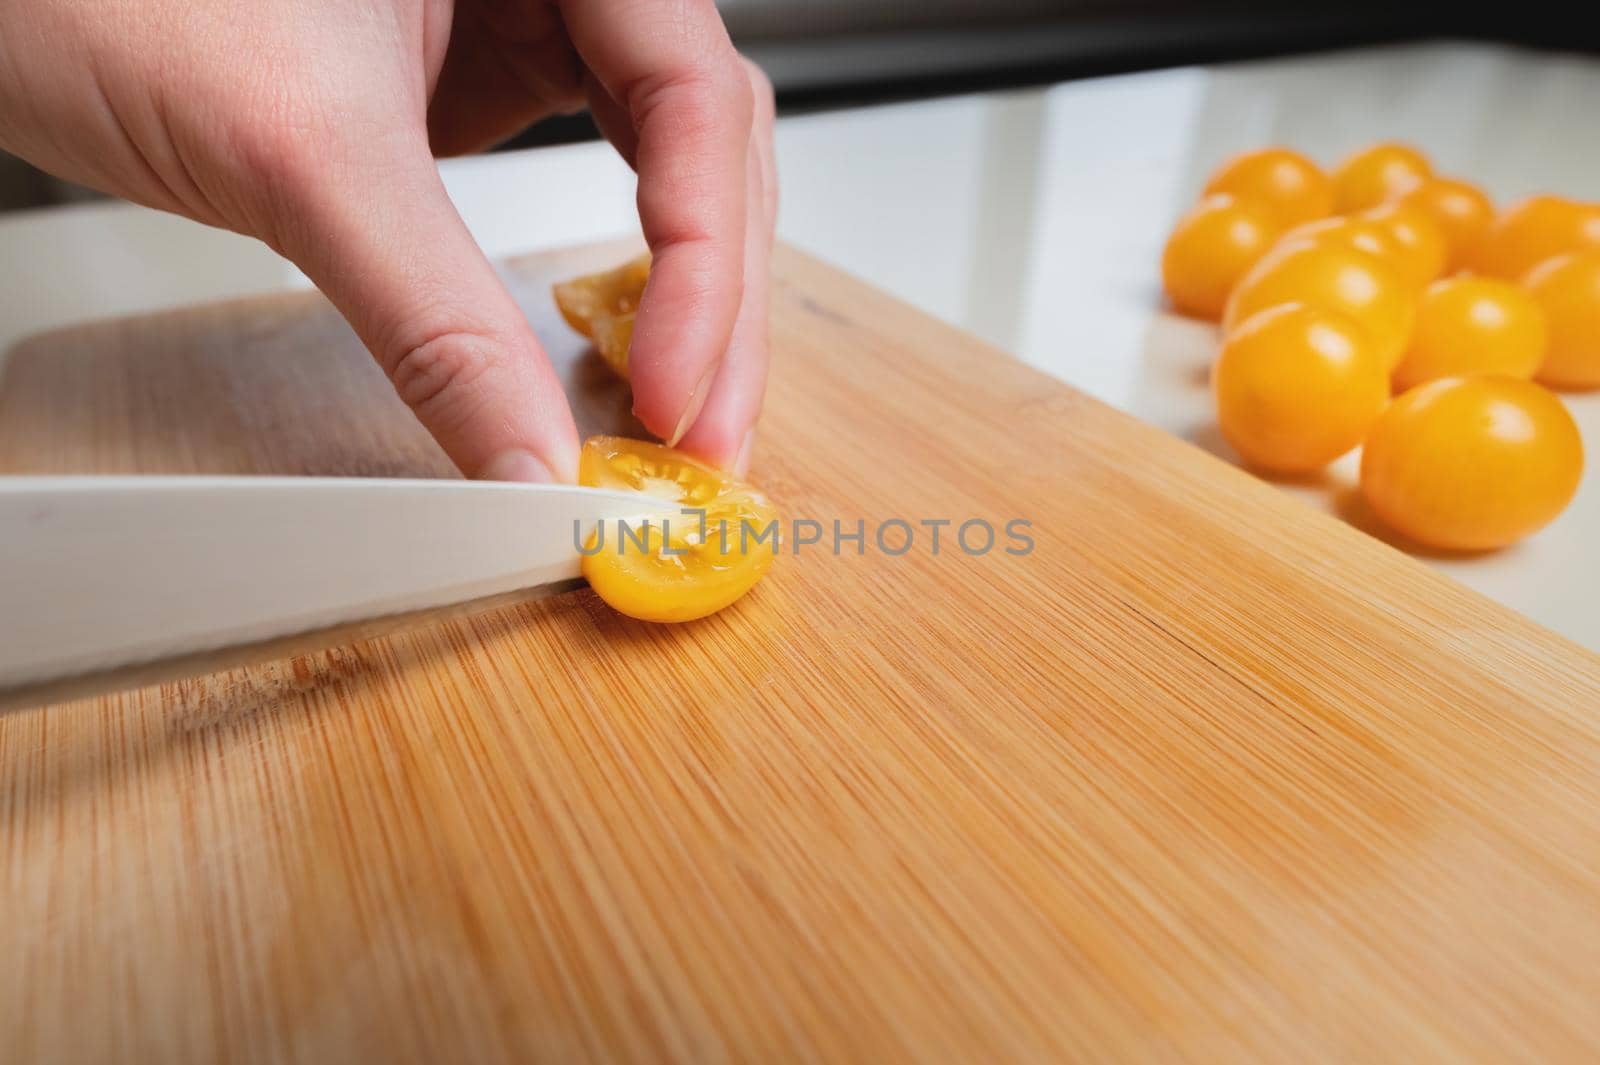 Sliced yellow cherry tomatoes on a wooden board in shallow depth of field against the background of a bowl with veggie salad ingredients by yanik88